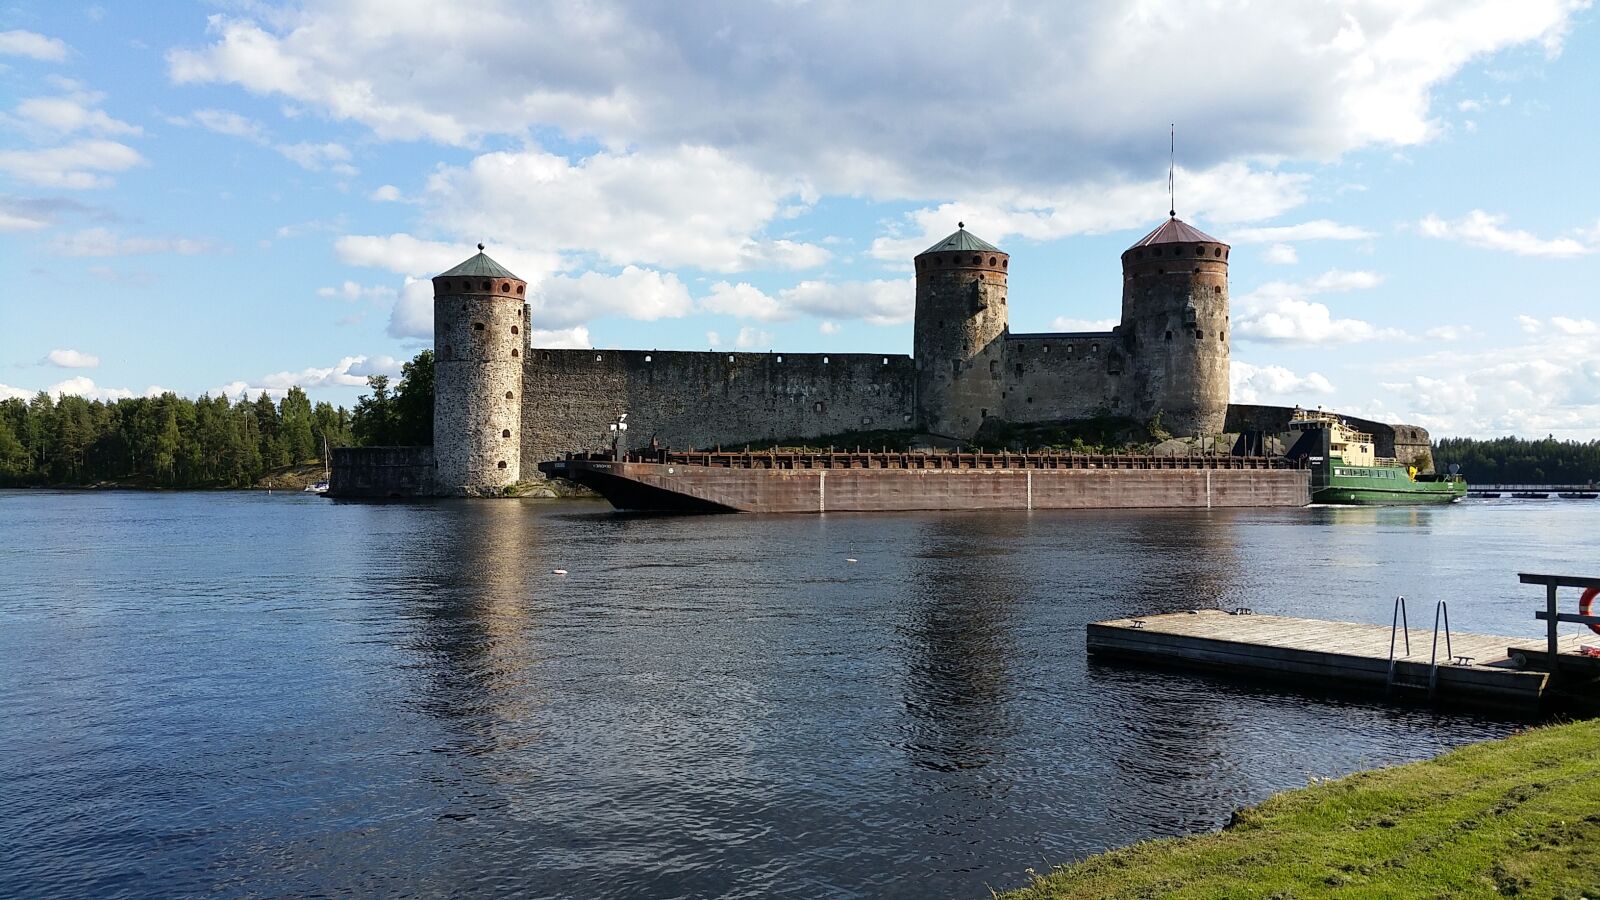 Samsung Galaxy S5 LTE-A sample photo. Savonlinna, moated castle, opera photography